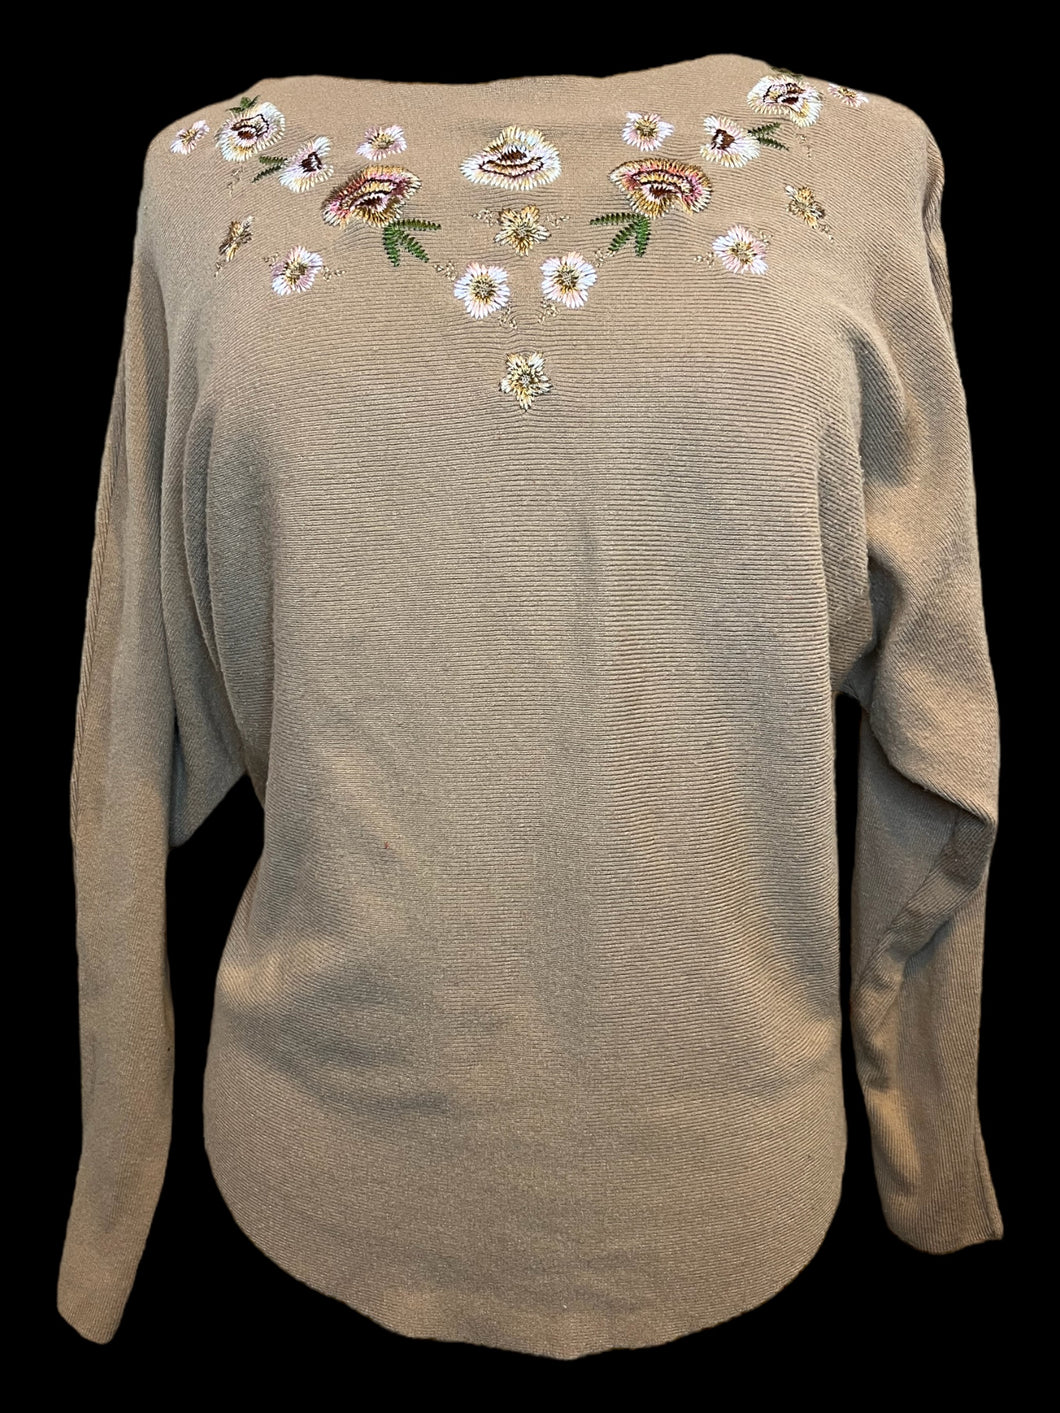 XL Beige & multicolor floral embroidery long sleeve rib knit scoop neck sweater w/ rounded hem